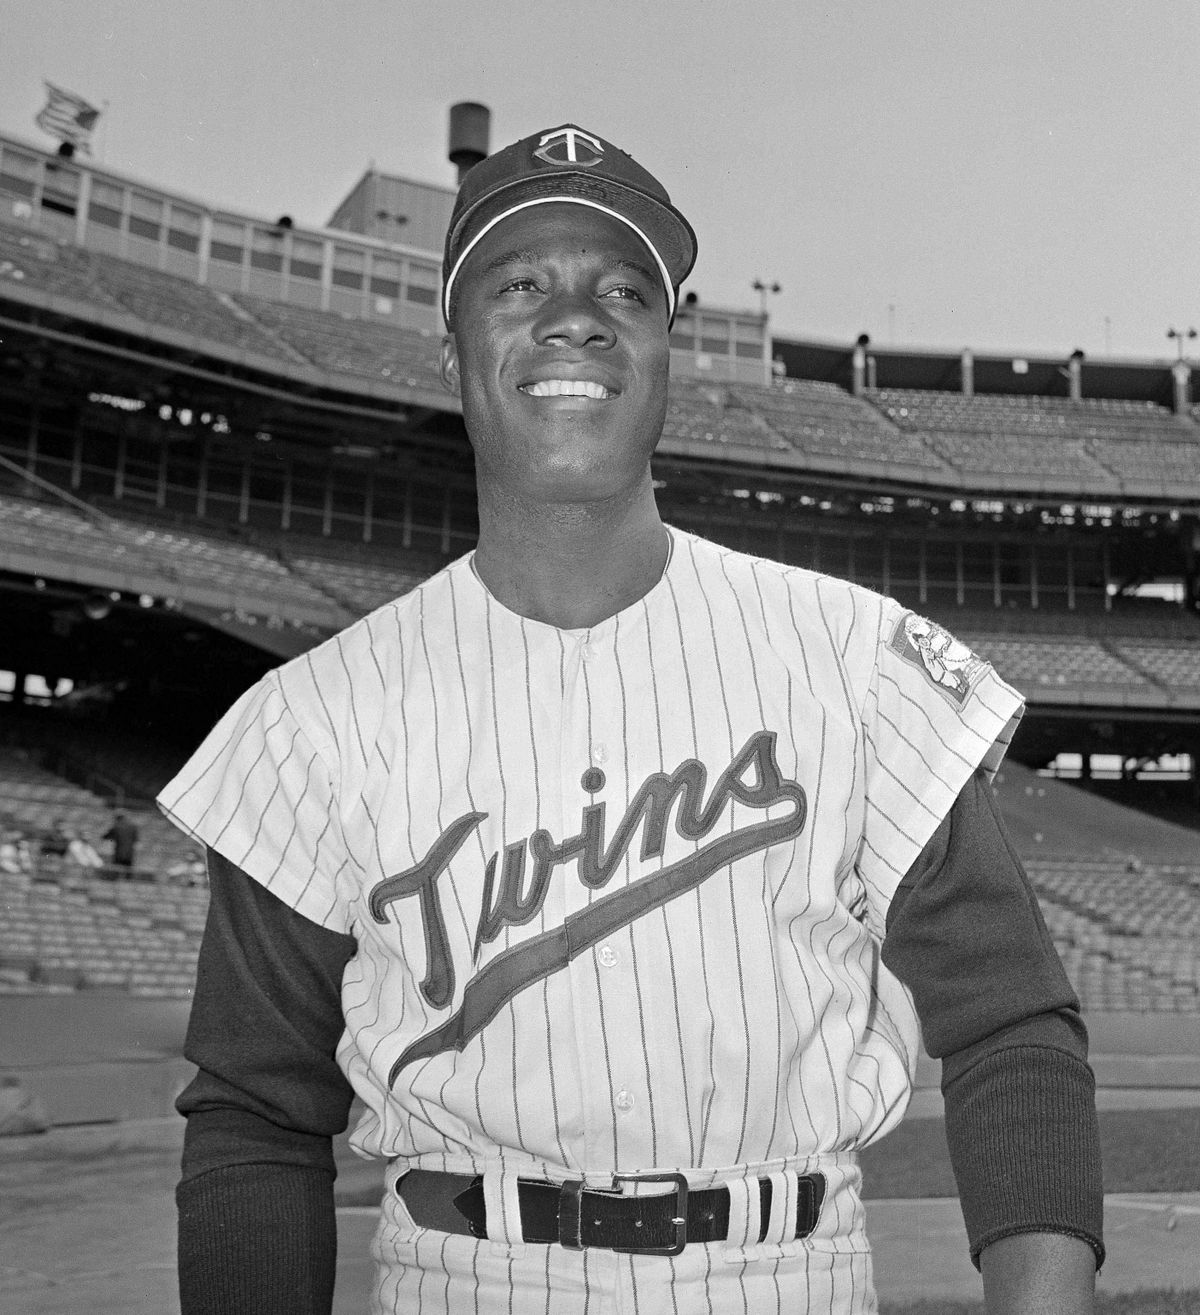  In this June 21, 1964 photo, Minnesota Twins pitcher Jim "Mudcat" Grant poses. Grant, the first Black 20-game winner in the major leagues and a key part of Minnesota